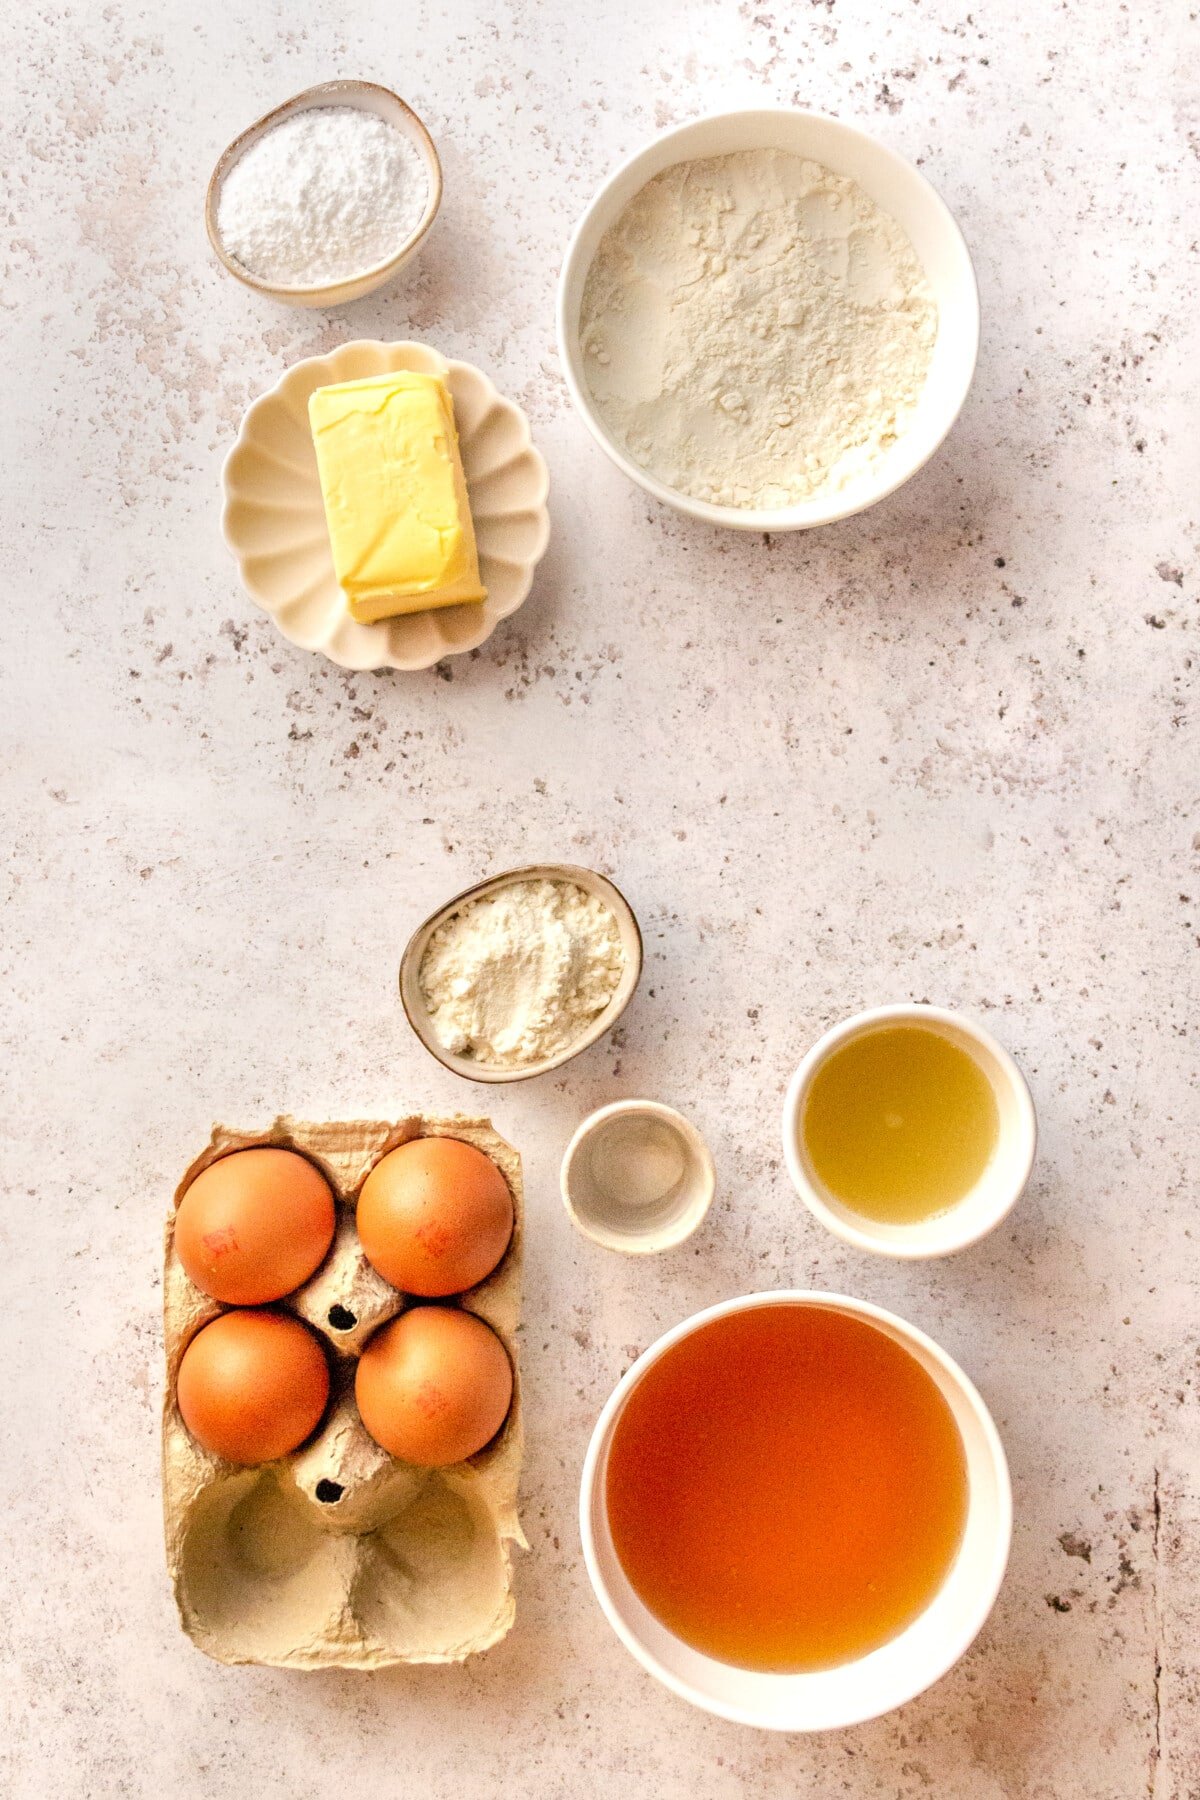 Ingredients for lemon bars sit in a variety of bowls on a concrete surface.